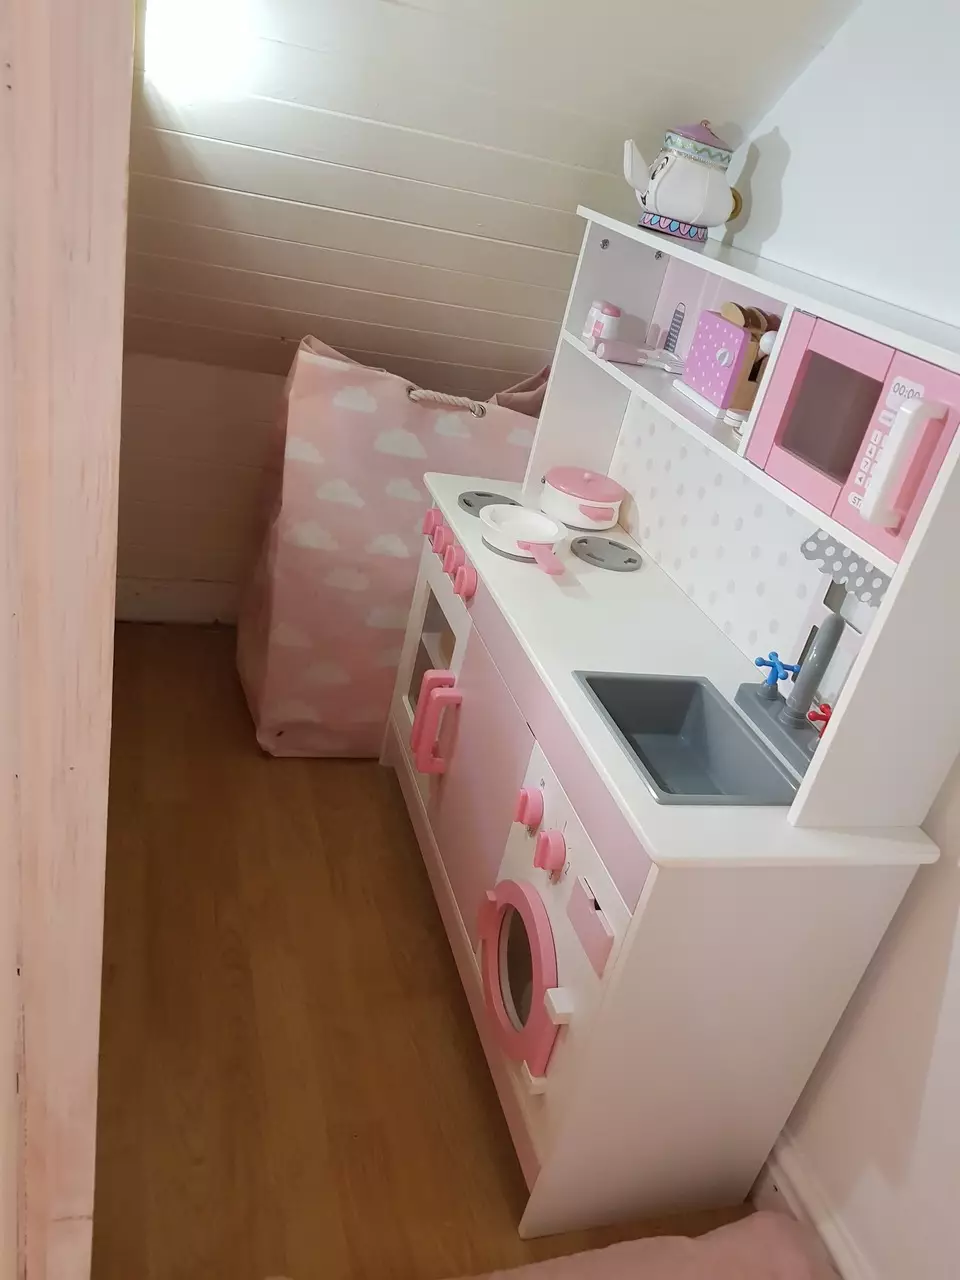 The under stairs play area comes complete with kitchen. (